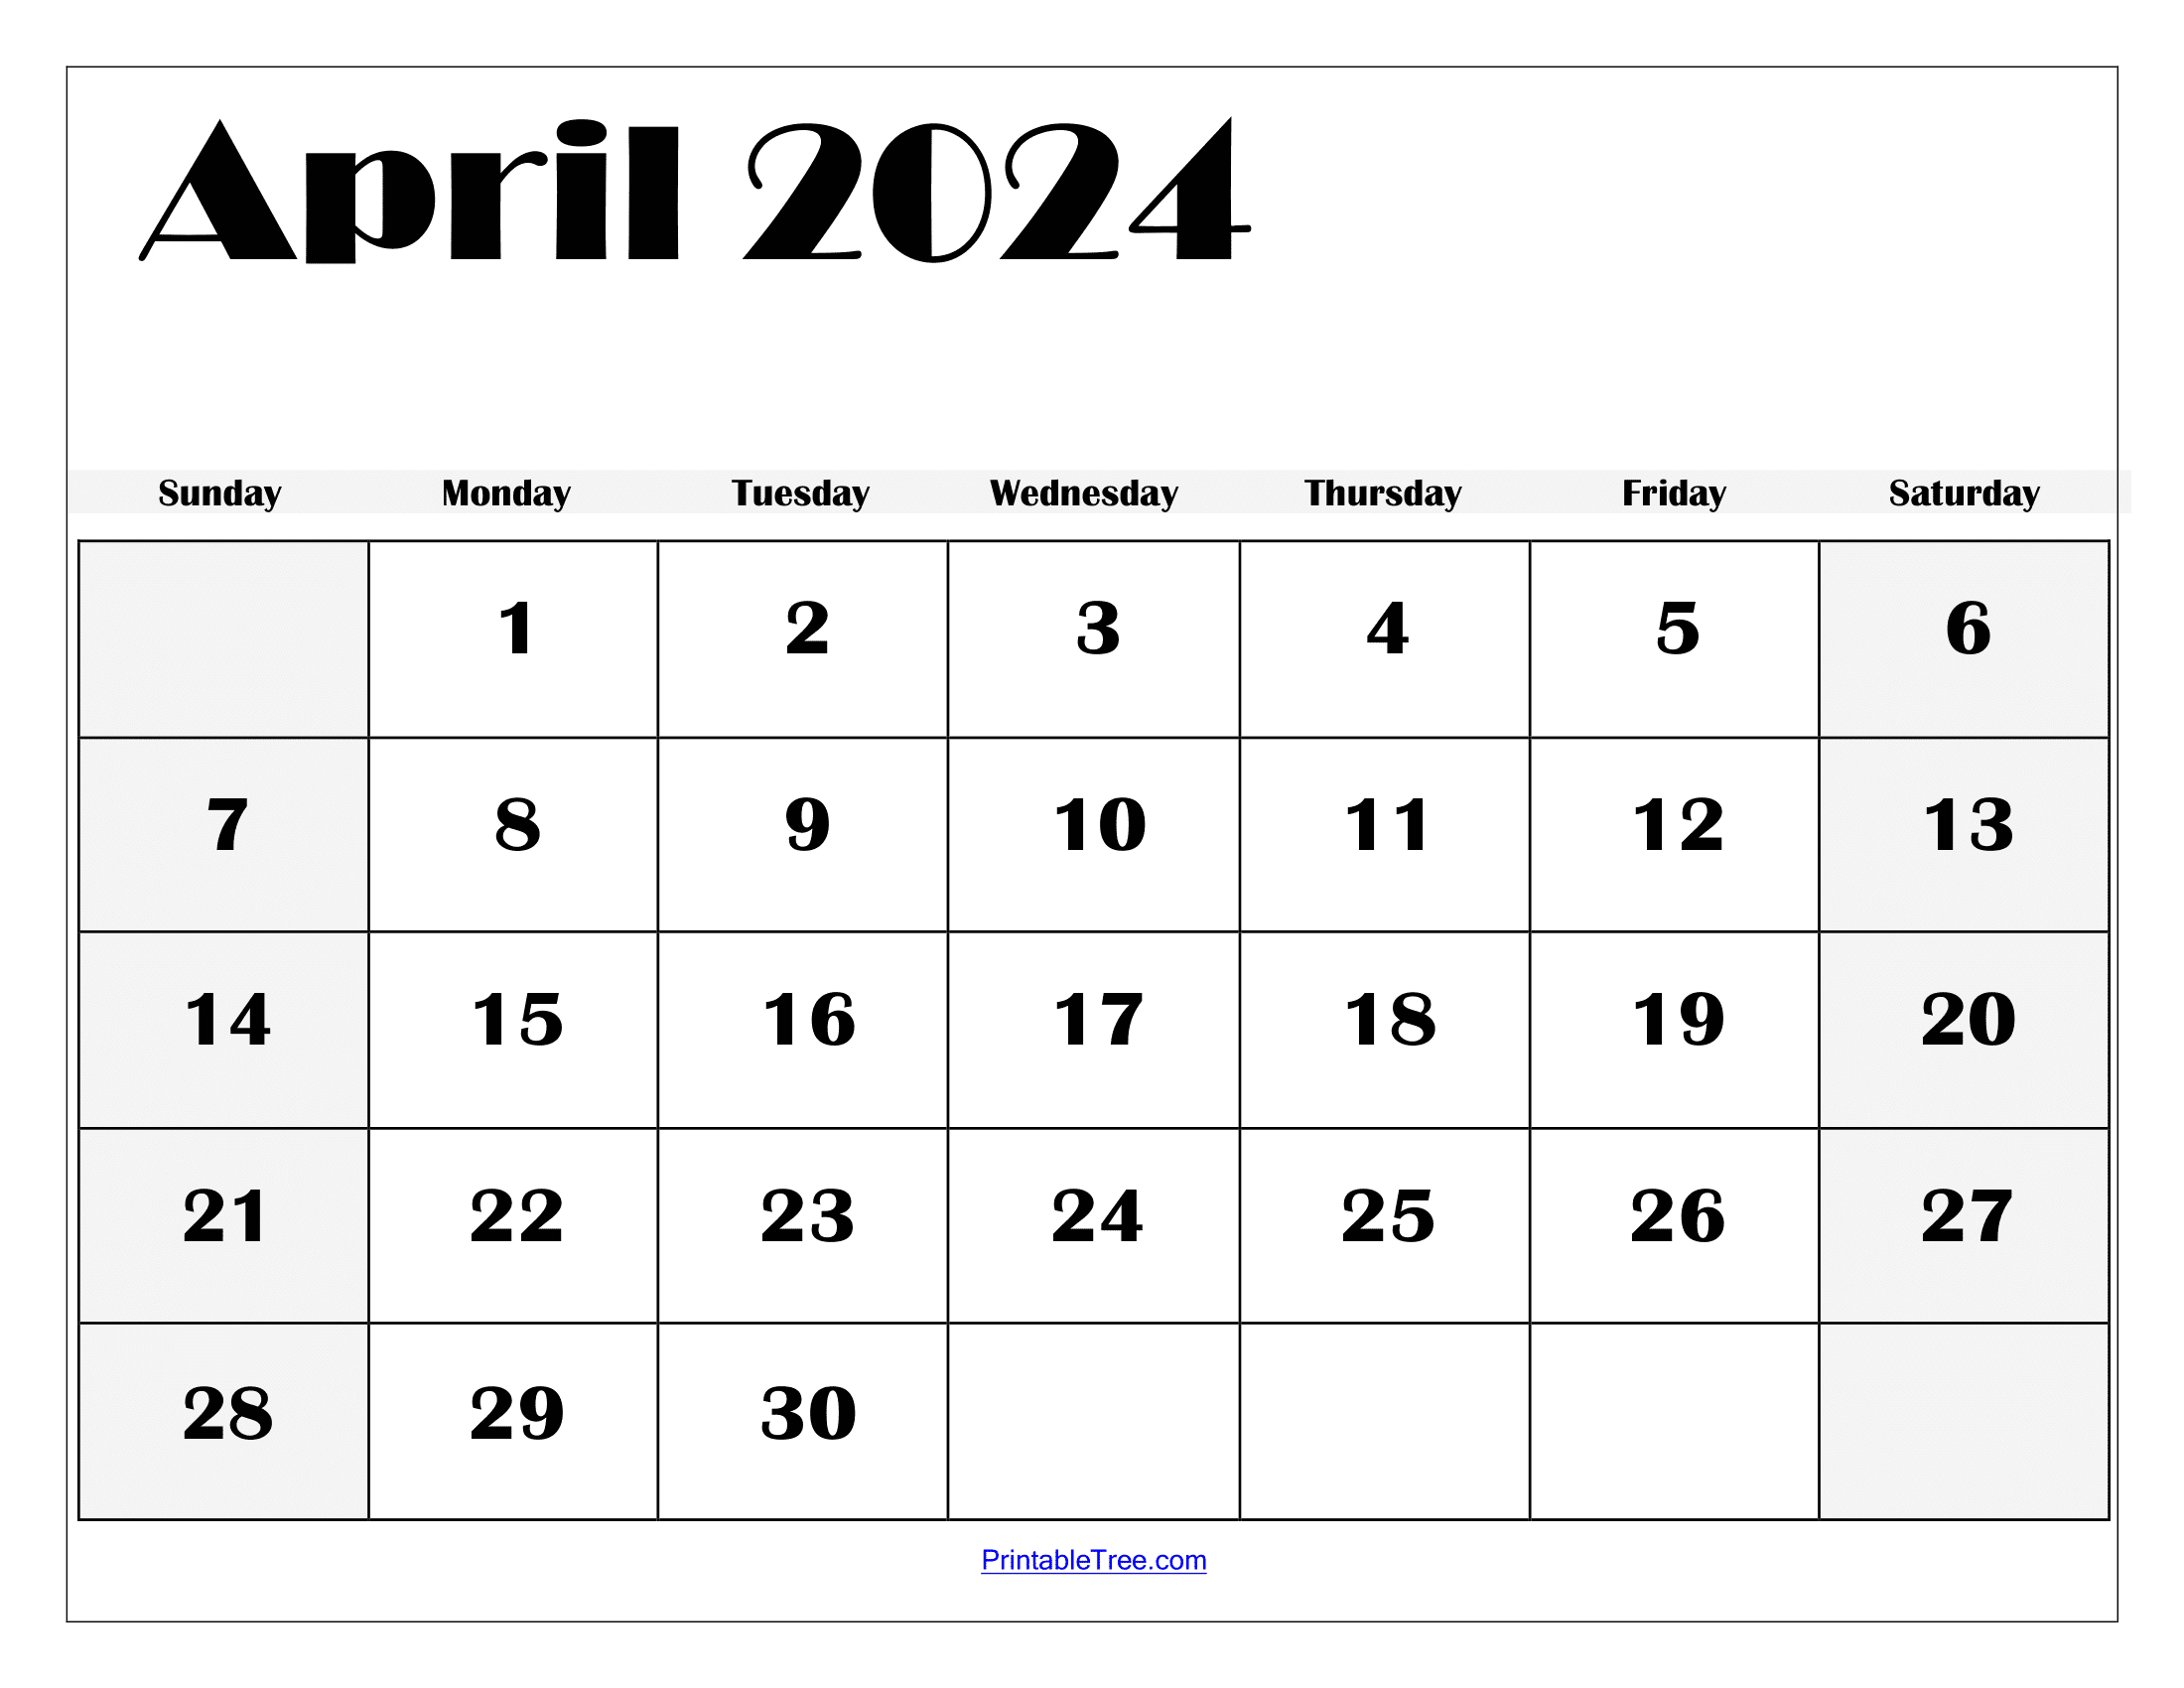 Blank April 2024 Calendar Printable Pdf Template With Holidays throughout Free Printable Calendar April 2024 To March 2024